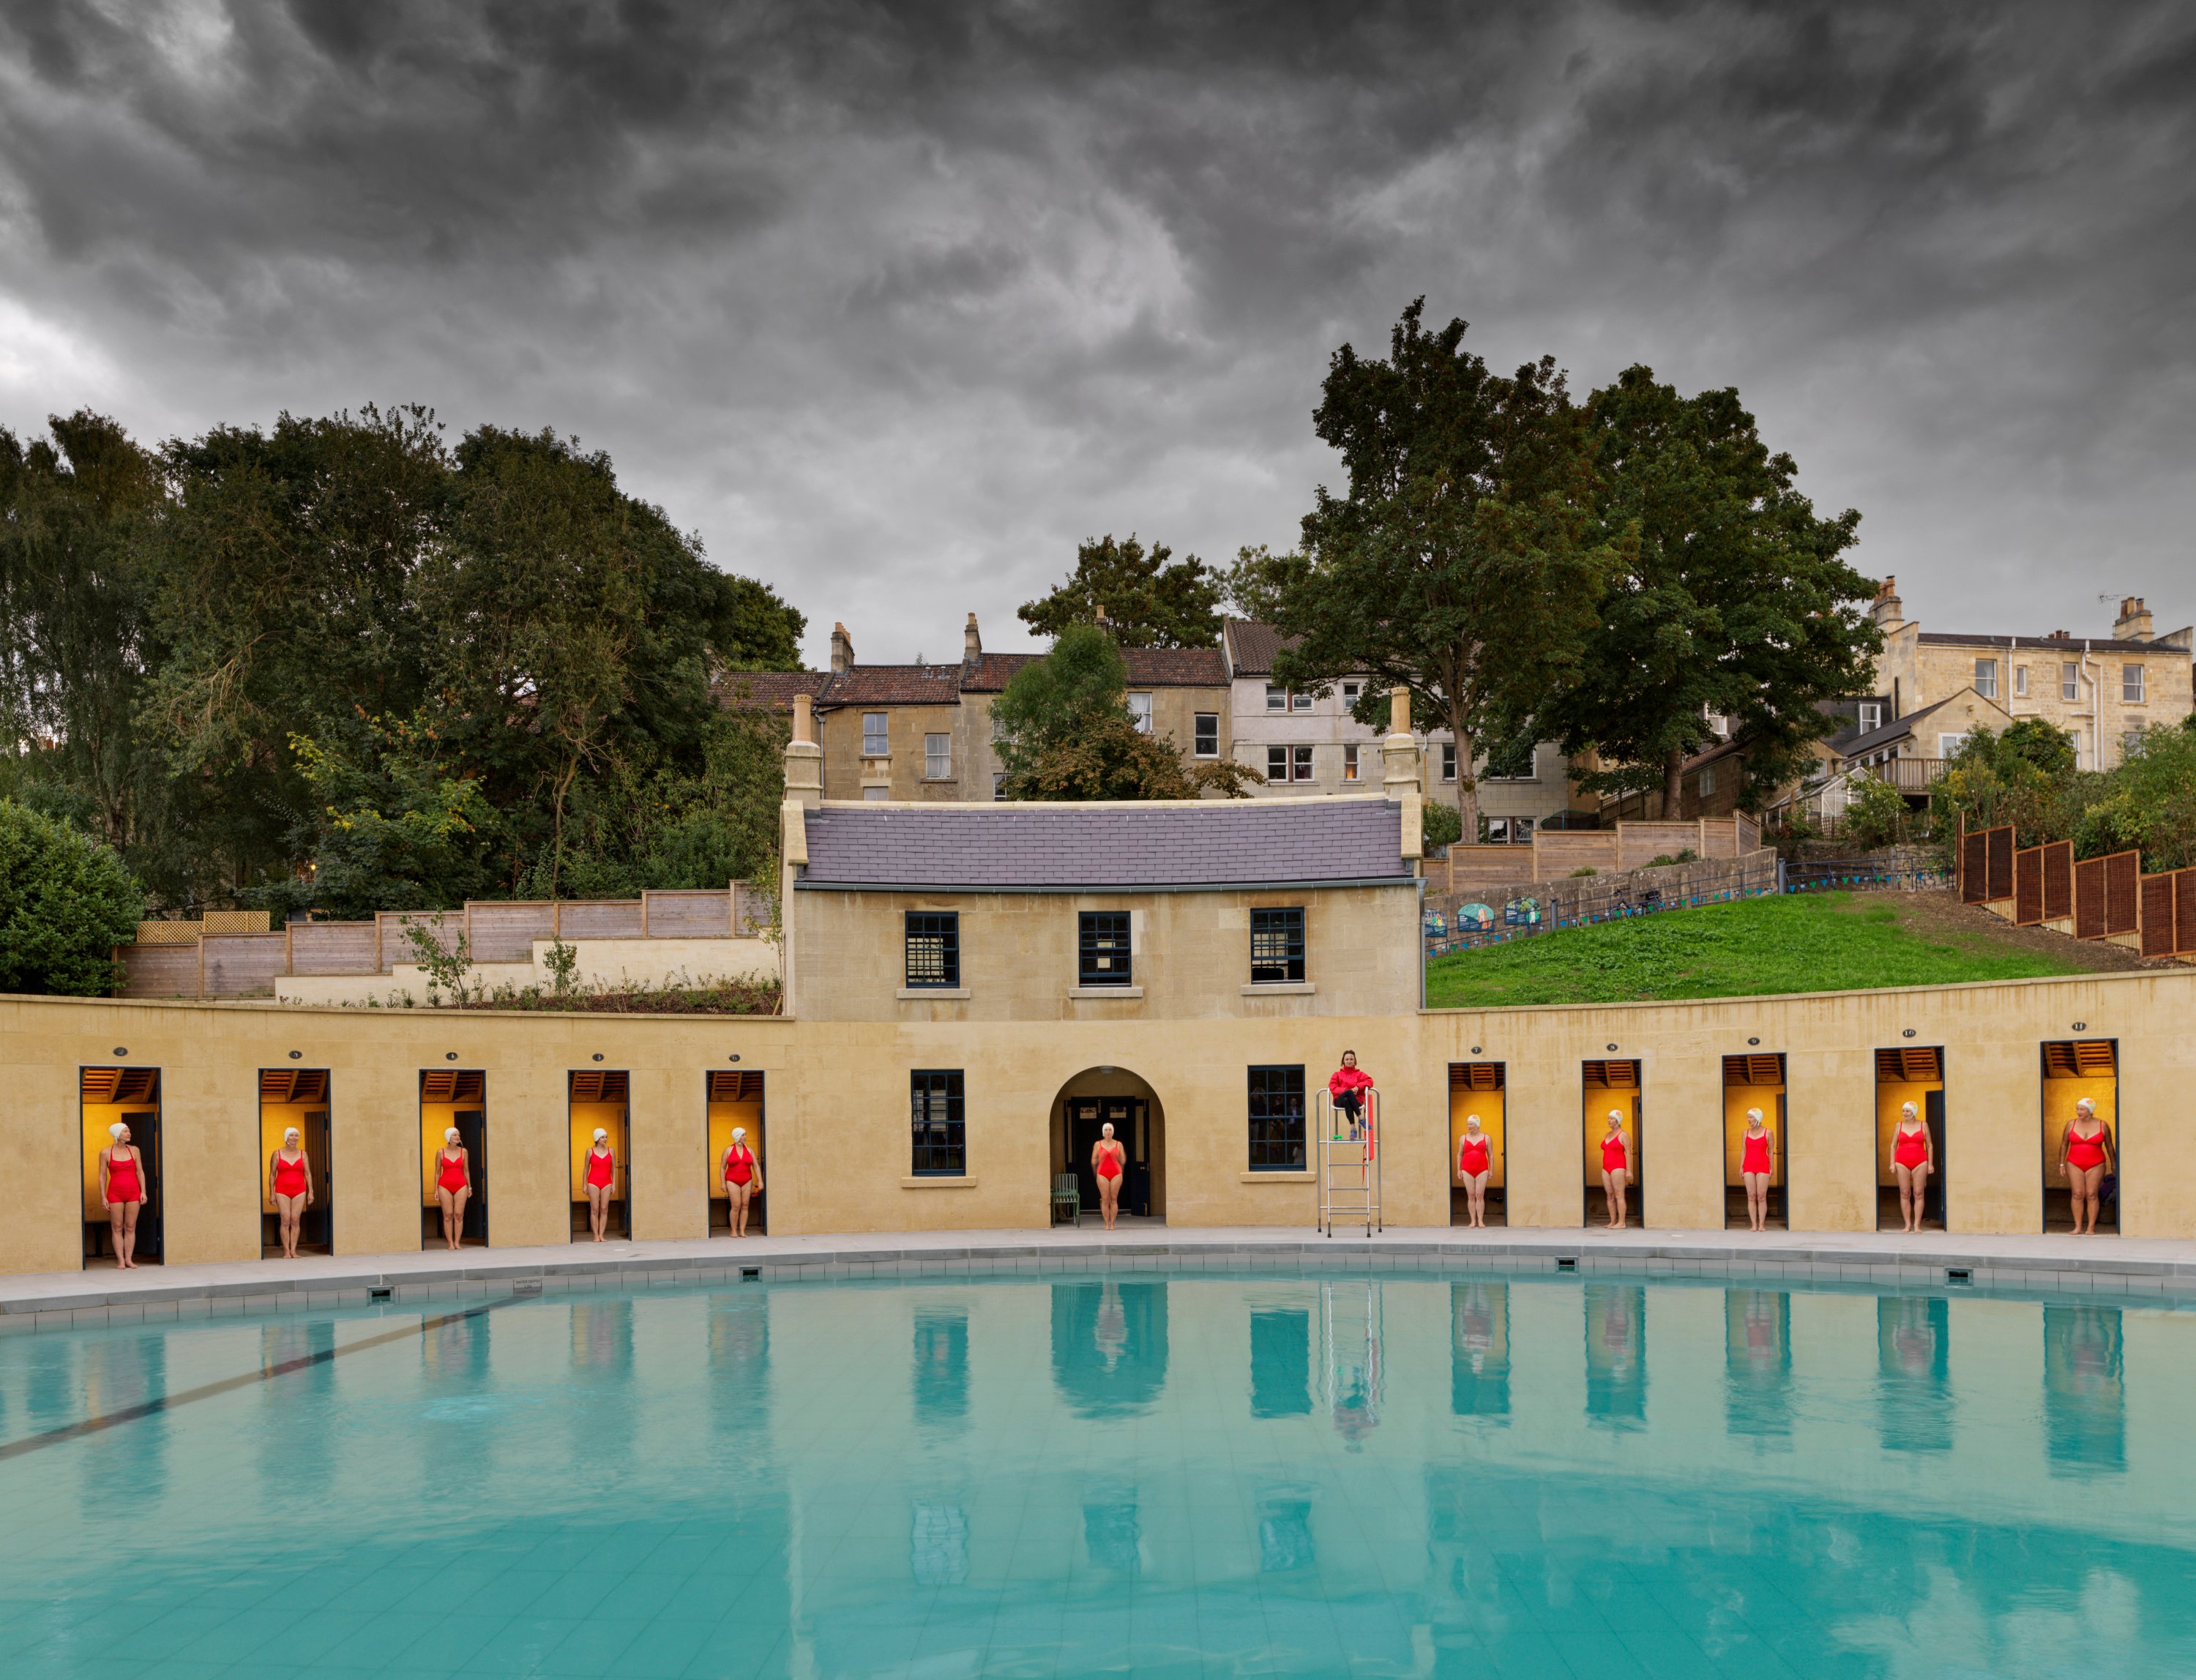 General view showing crescent and former caretakers cottage with members of Almost Synchro - synchronised swimming team. 